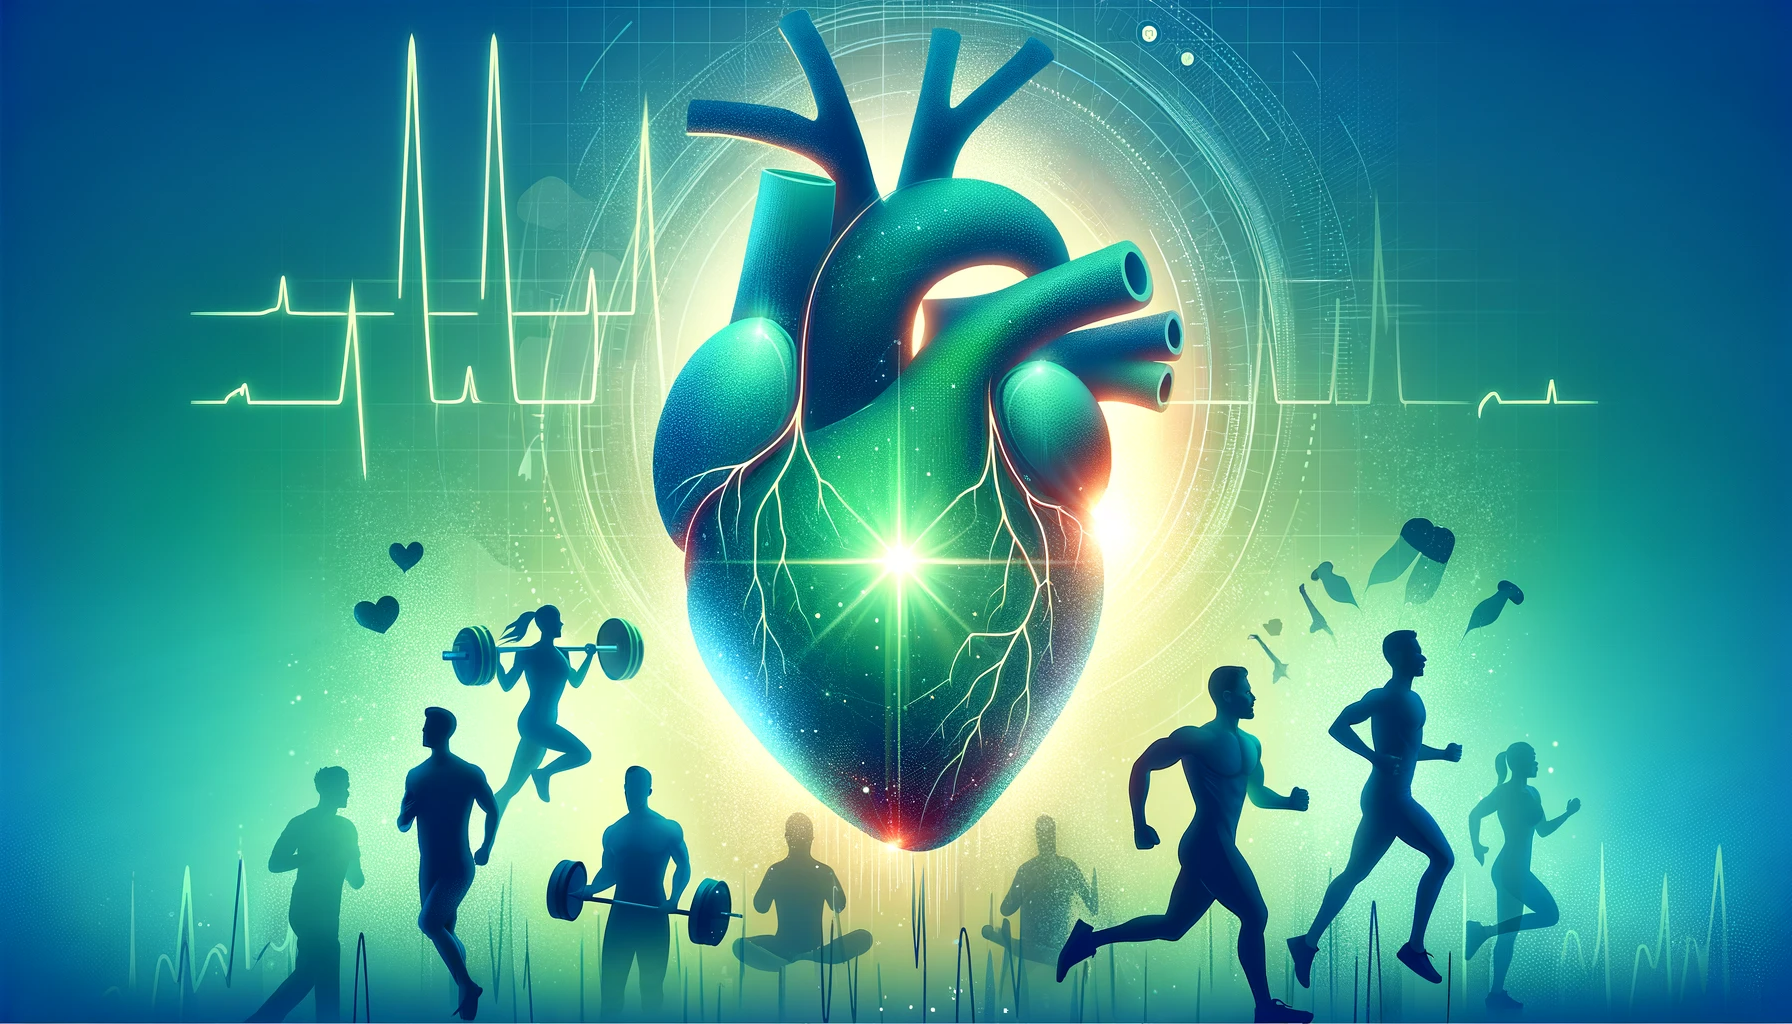 Cardio, Weights or Both A New Study's Eye-Opening Verdict for Heart Wellness